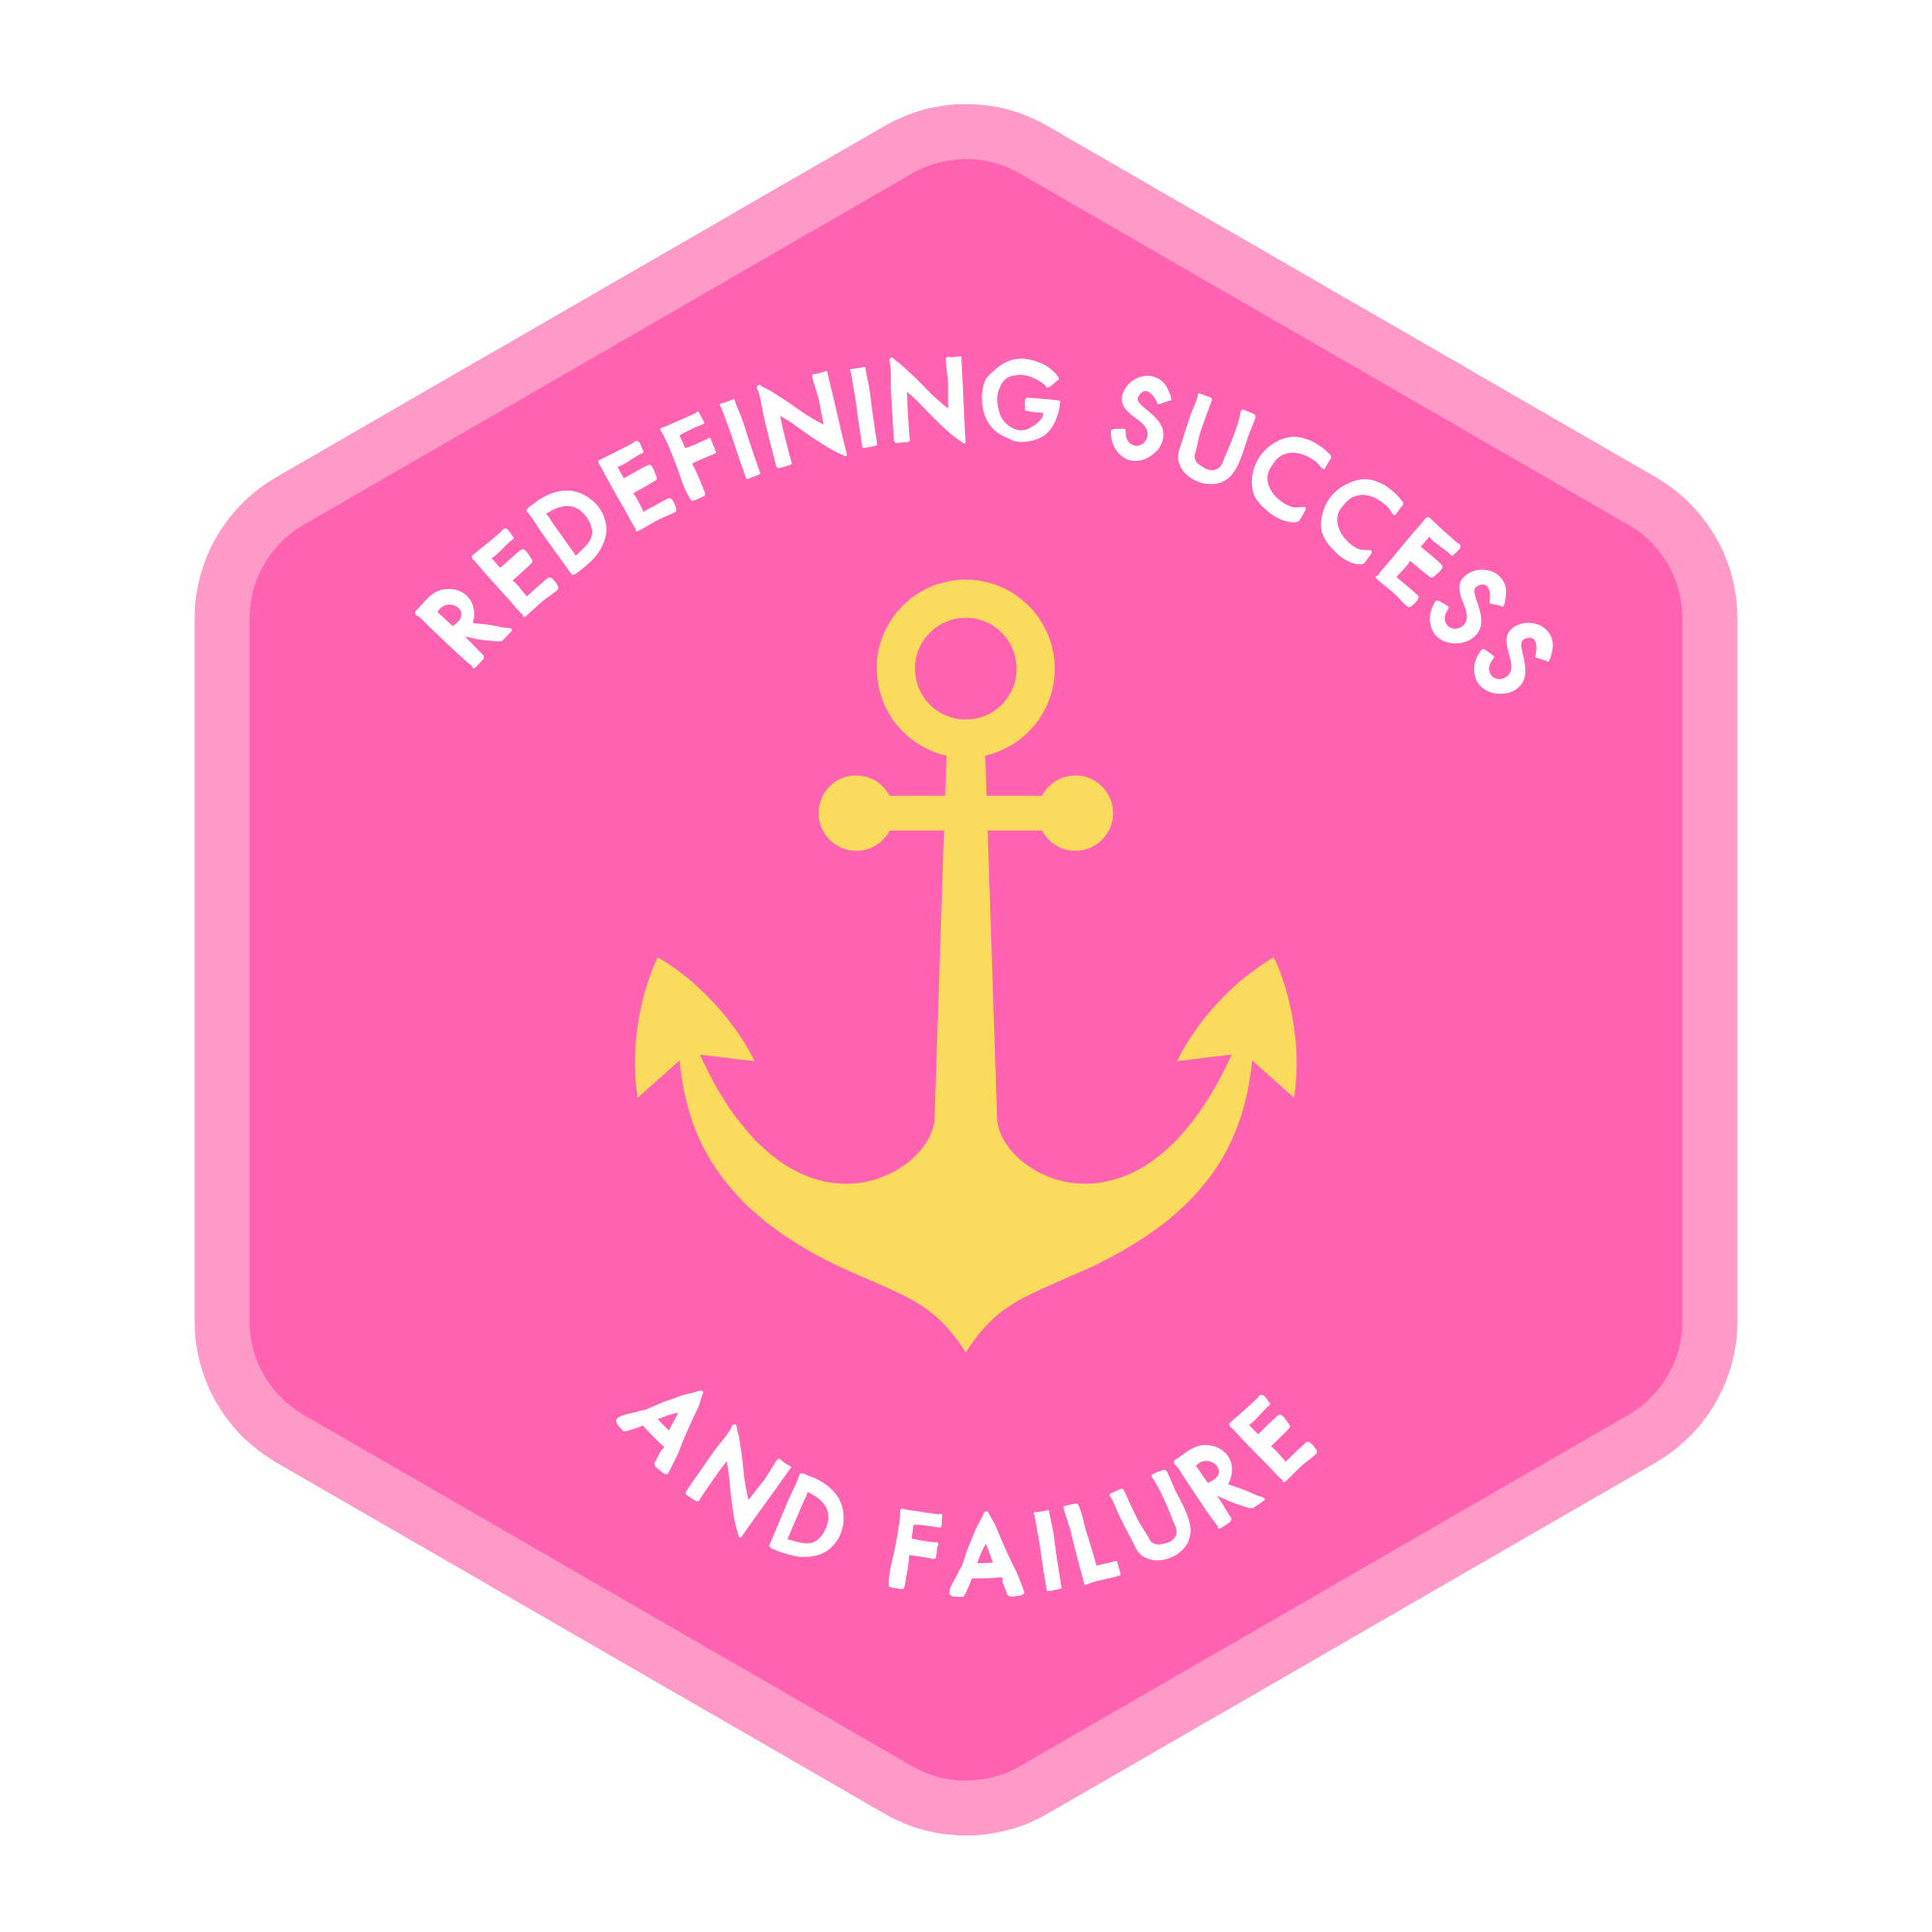 redefining success and failure workshop.png